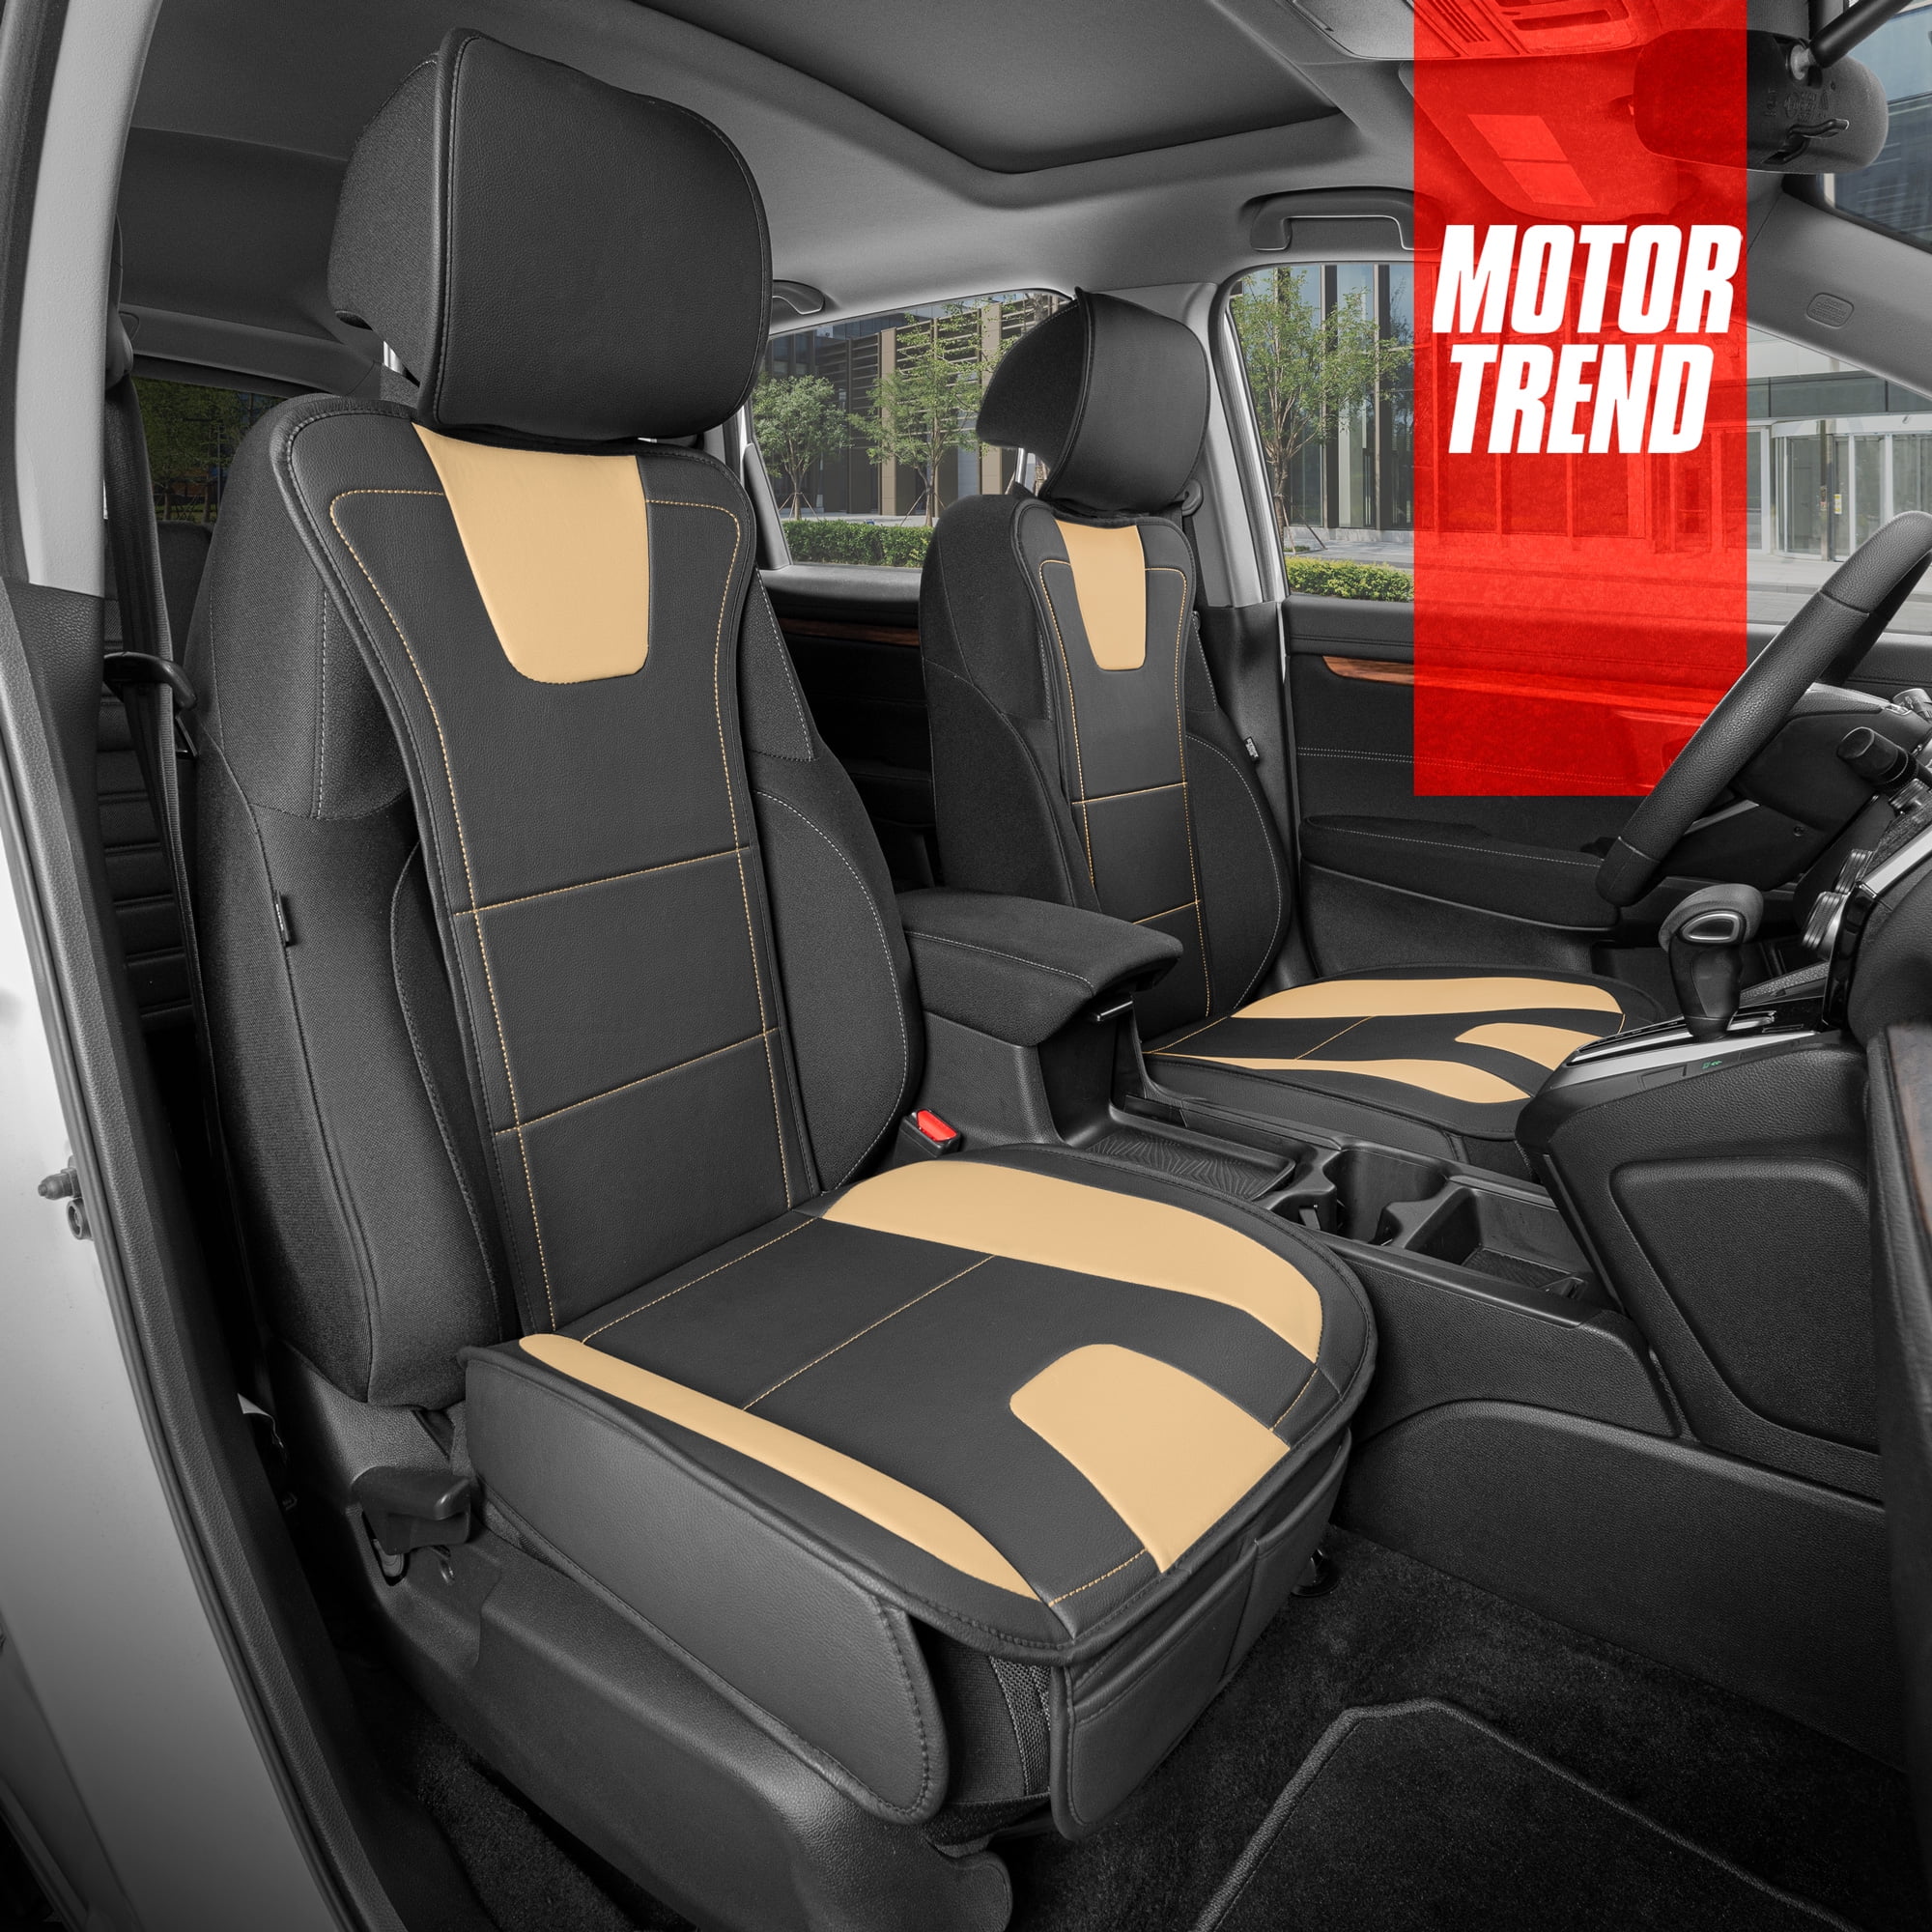 Motor Trend Seat Covers for Cars Trucks SUV, Faux Leather 2-Pack Black  Padded with Storage Pockets, Premium Interior Car Seat Cover